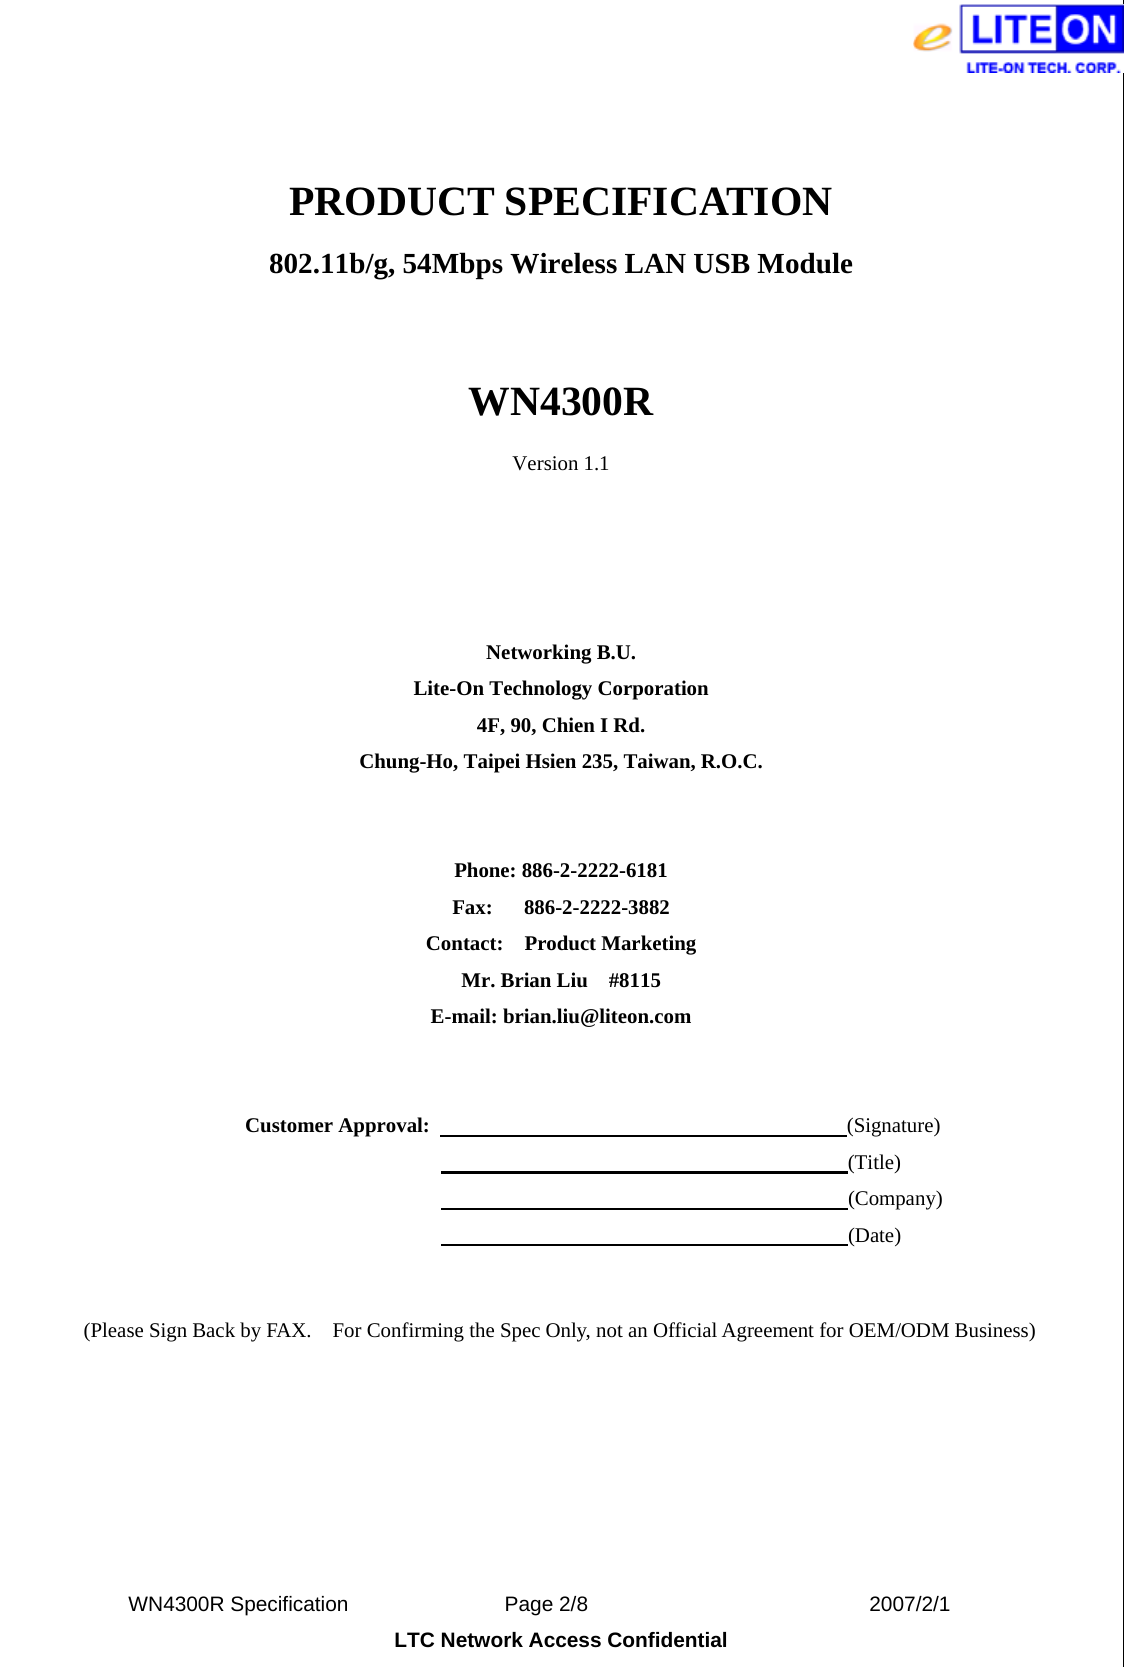  WN4300R Specification               Page 2/8                           2007/2/1 LTC Network Access Confidential  PRODUCT SPECIFICATION 802.11b/g, 54Mbps Wireless LAN USB Module  WN4300R Version 1.1     Networking B.U. Lite-On Technology Corporation 4F, 90, Chien I Rd. Chung-Ho, Taipei Hsien 235, Taiwan, R.O.C.   Phone: 886-2-2222-6181 Fax:   886-2-2222-3882 Contact:  Product Marketing Mr. Brian Liu    #8115 E-mail: brian.liu@liteon.com     Customer Approval:                                        (Signature)                                                                      (Title)                                                                      (Company)                                                                      (Date)   (Please Sign Back by FAX.    For Confirming the Spec Only, not an Official Agreement for OEM/ODM Business) 